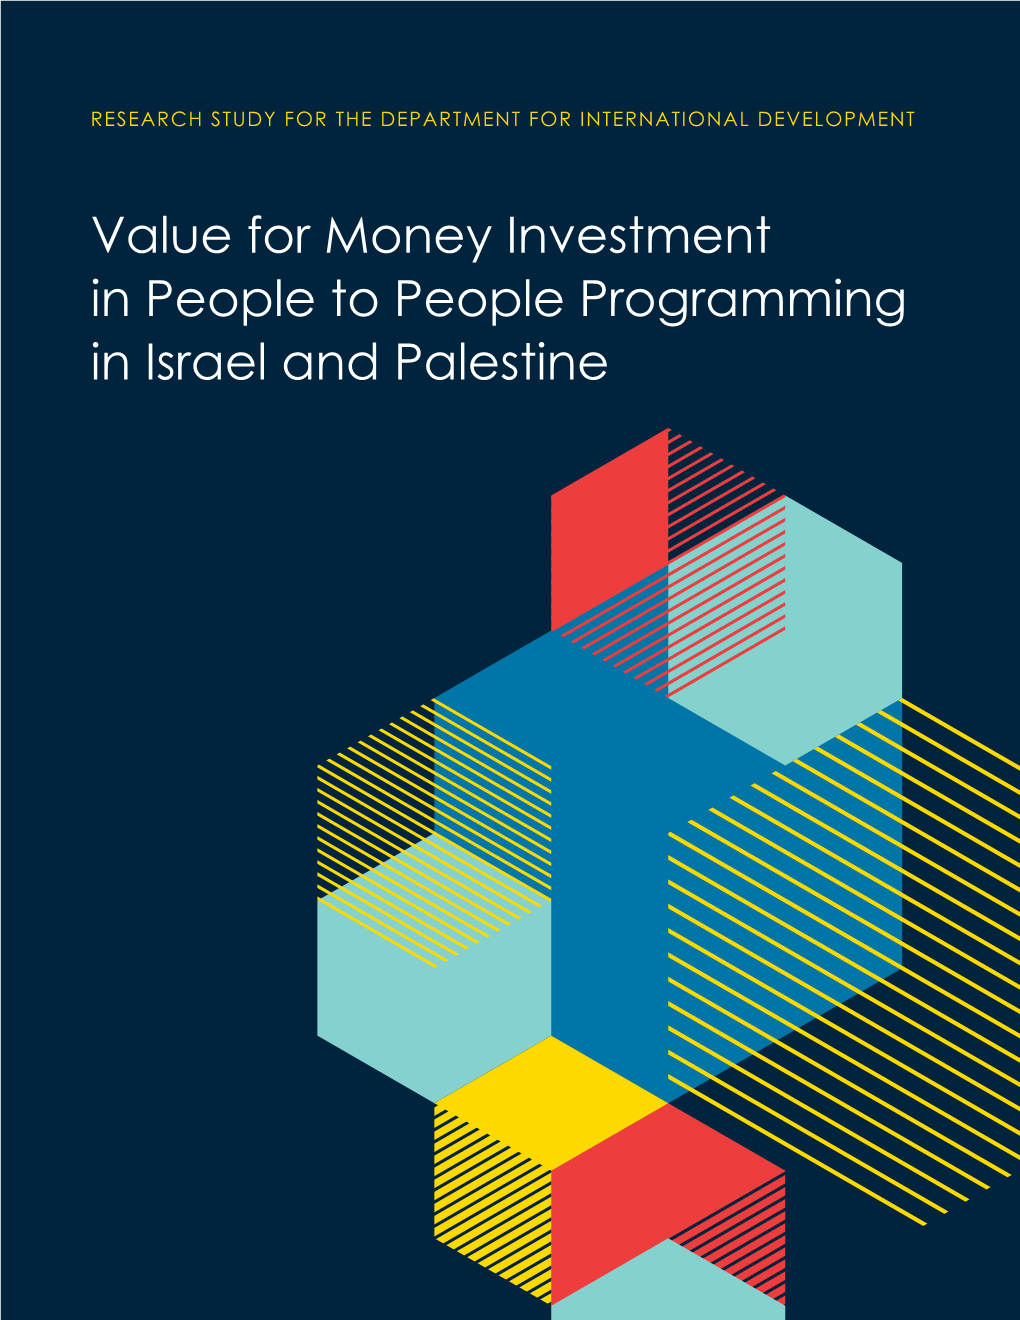 Value for Money Investment in People to People Programming in Israel and Palestine